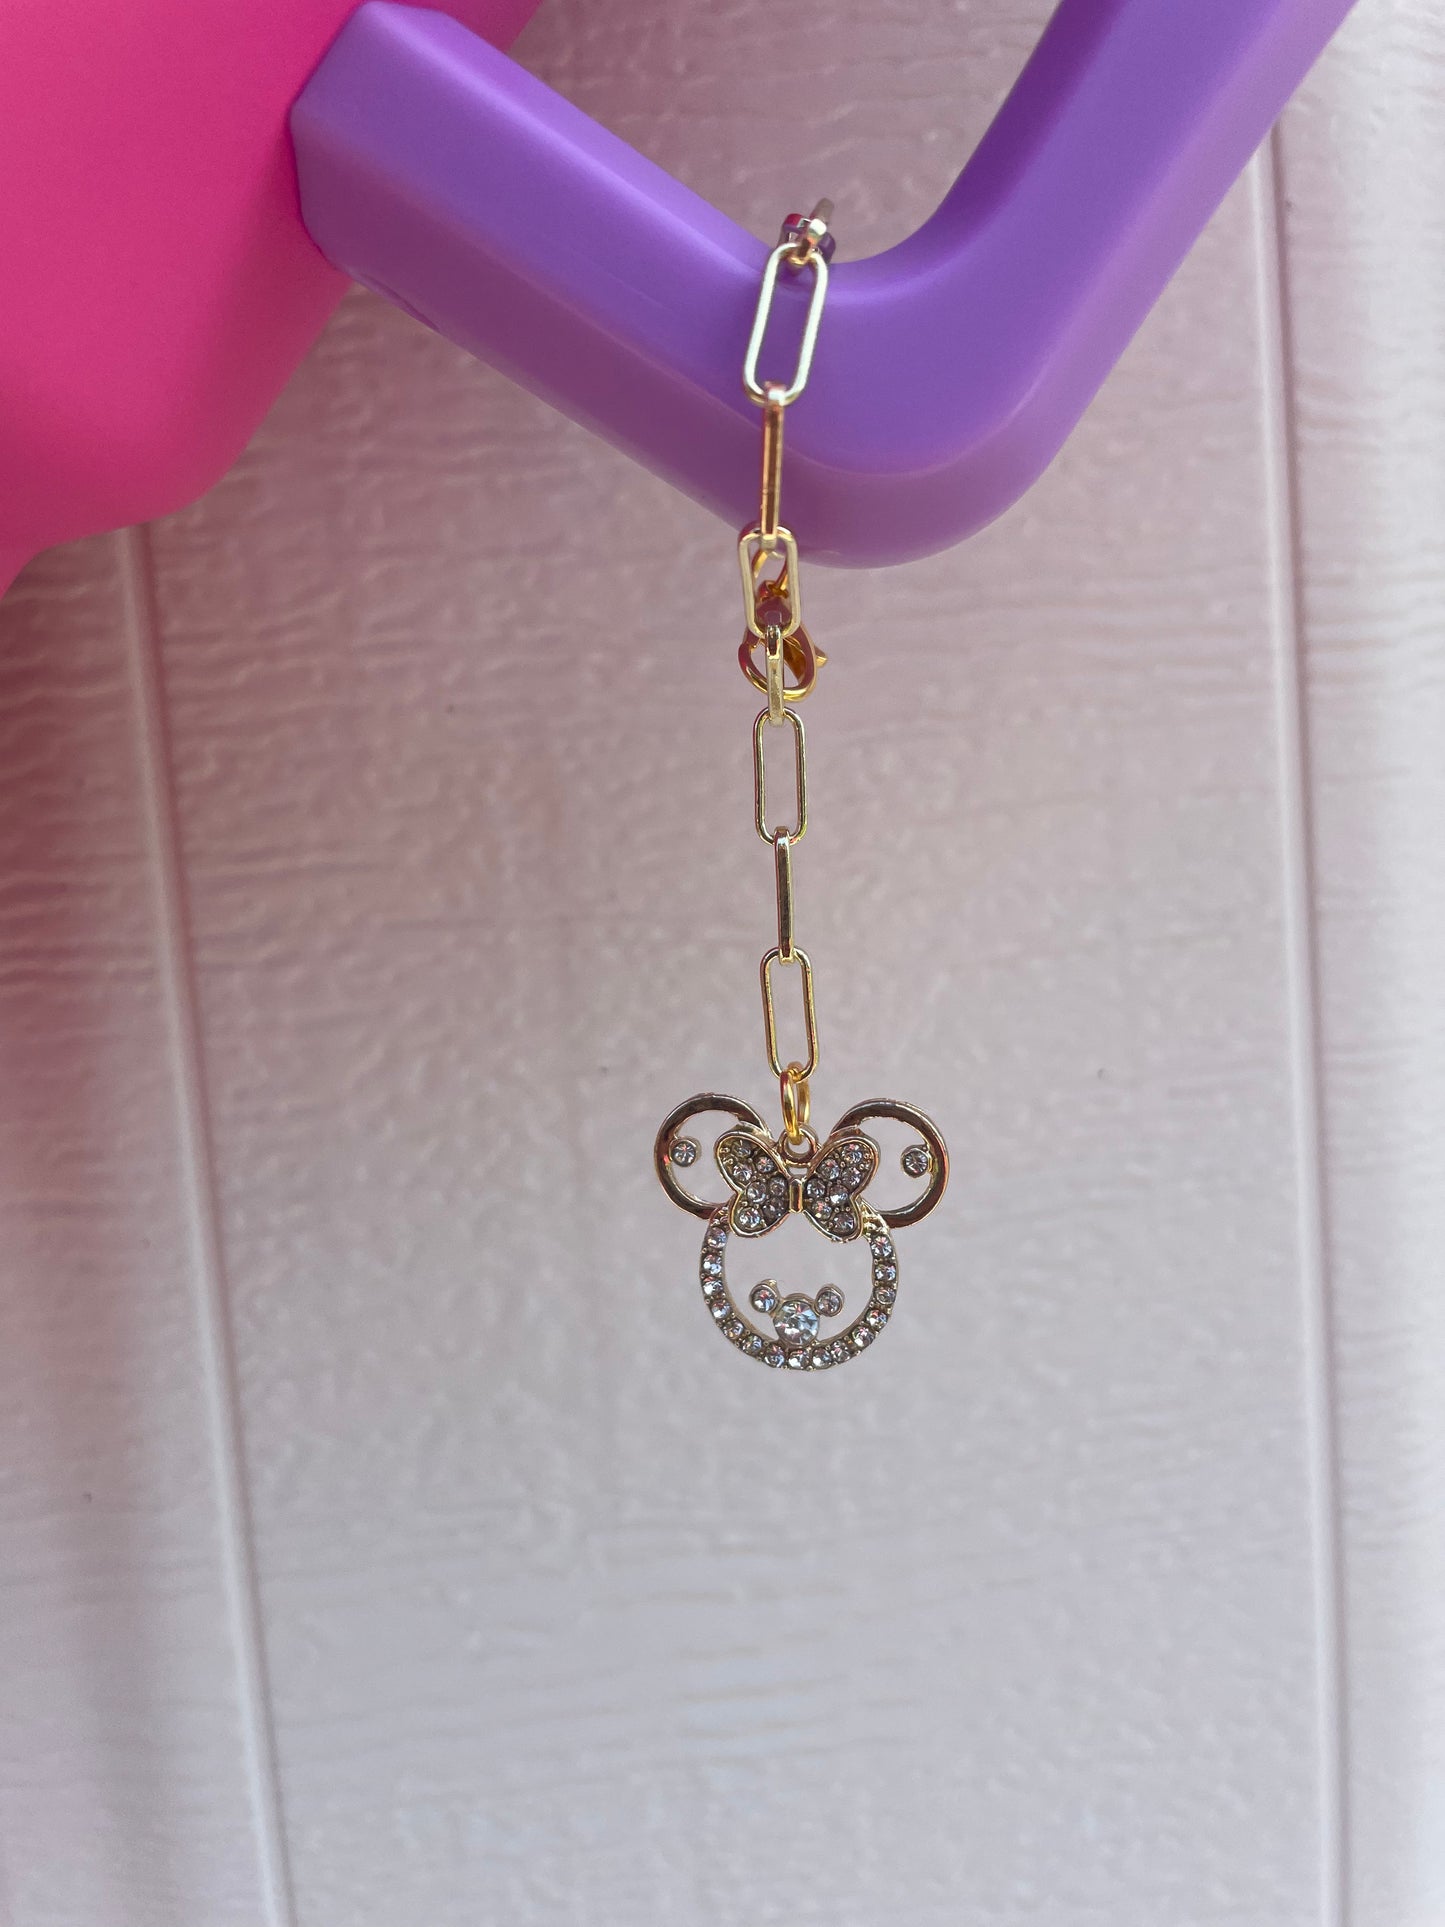 Magical Mouse Ears Stanley Tumbler Charm